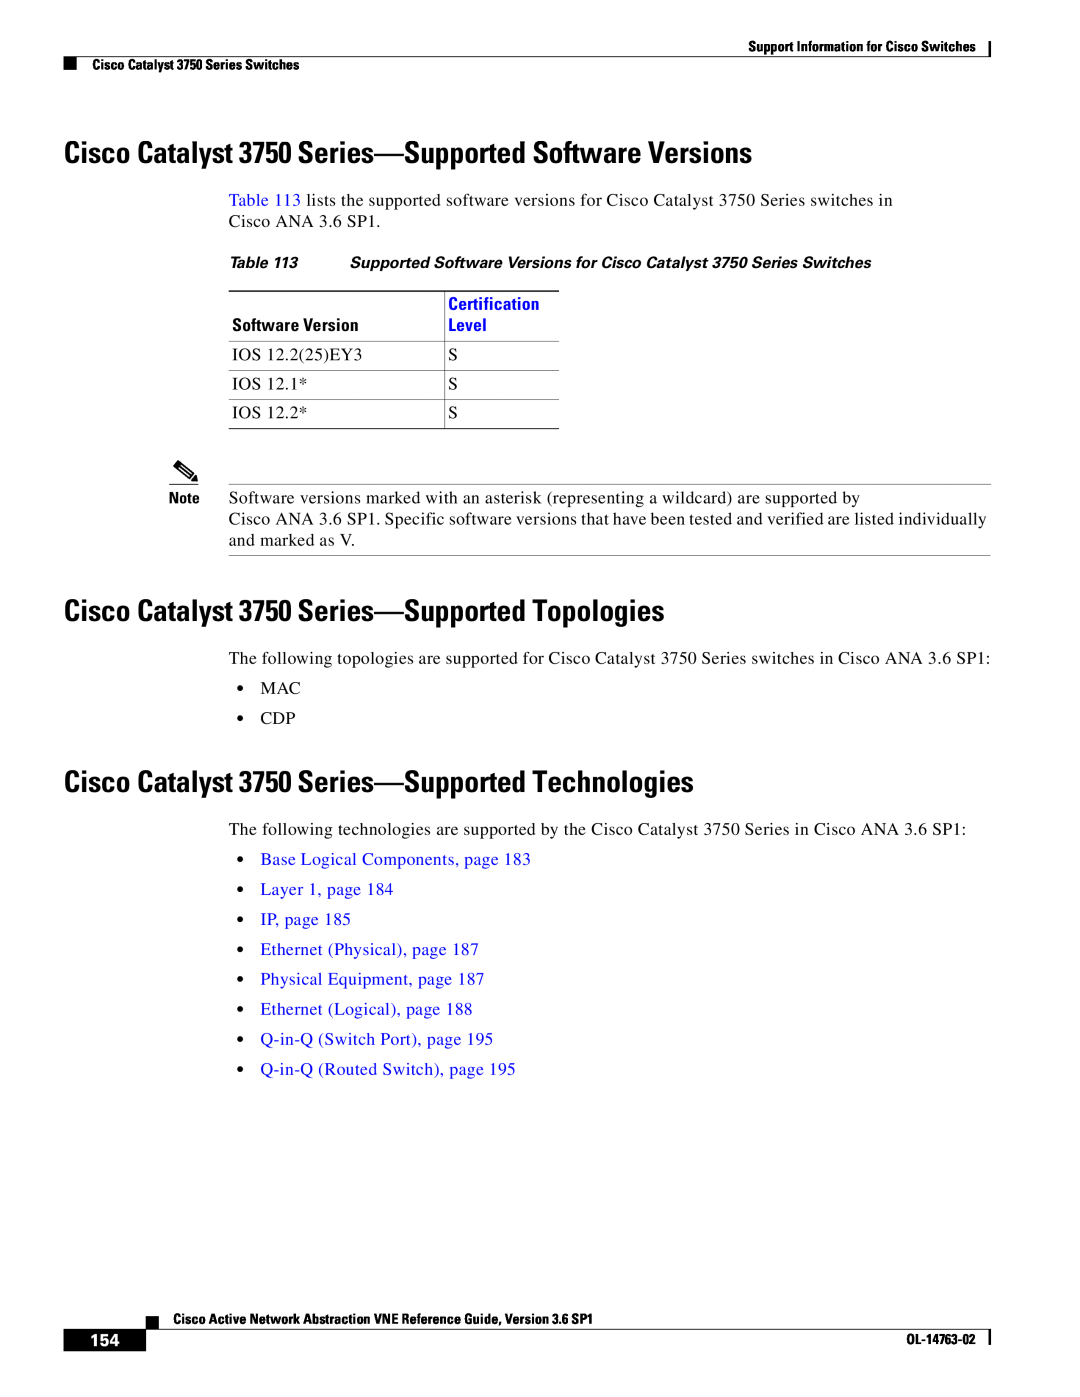 Cisco Systems OL-14763-02 manual Cisco Catalyst 3750 Series-Supported Software Versions, Q-in-Q Routed Switch, page 